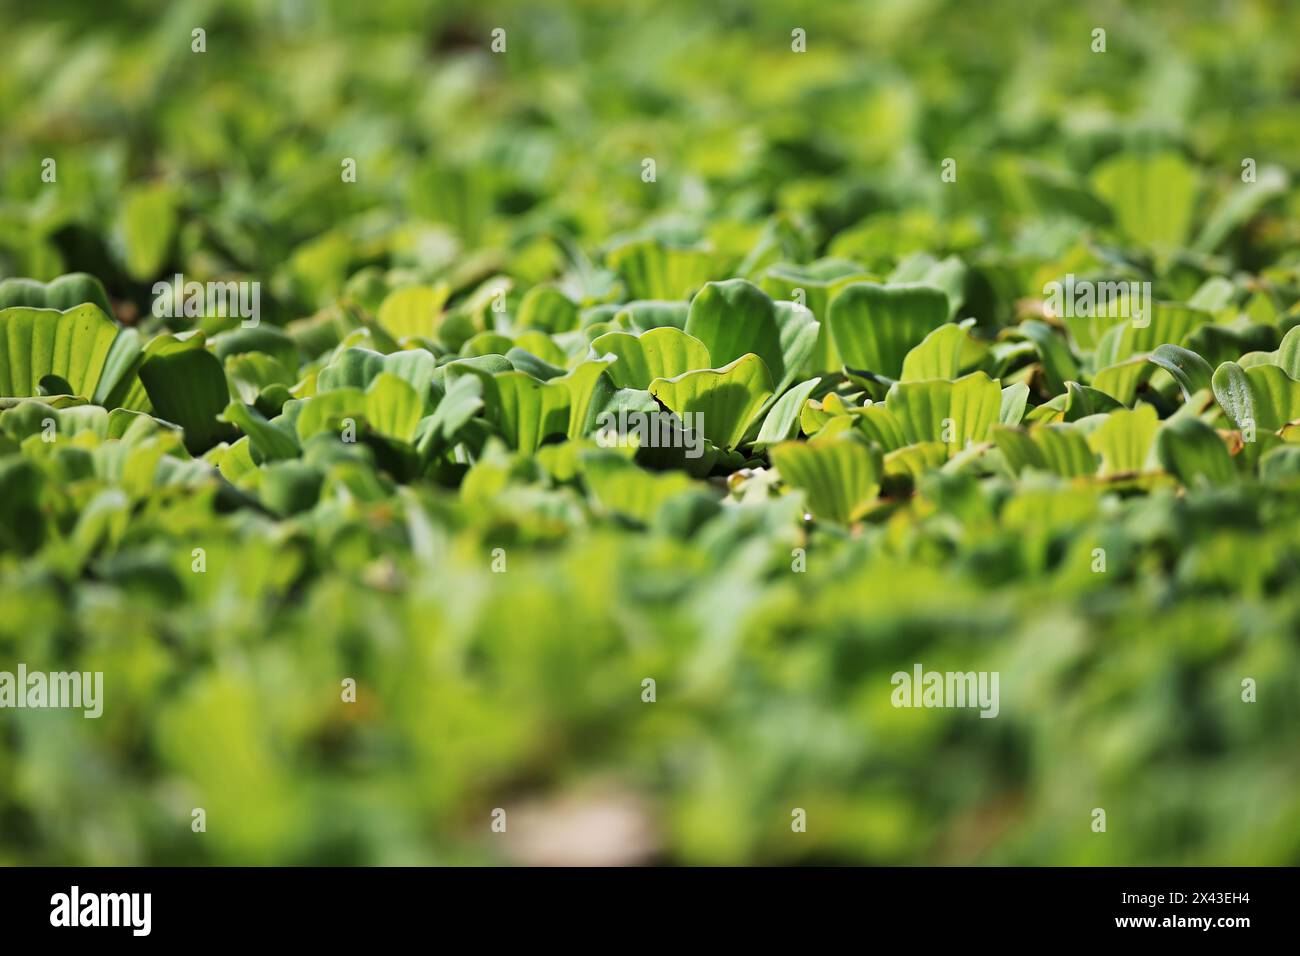 Water lettuce or Aquatic Plant a tropical floating plant, Water lettuce, or Pistia stratiotes Linnaeus water drops from rain Stock Photo